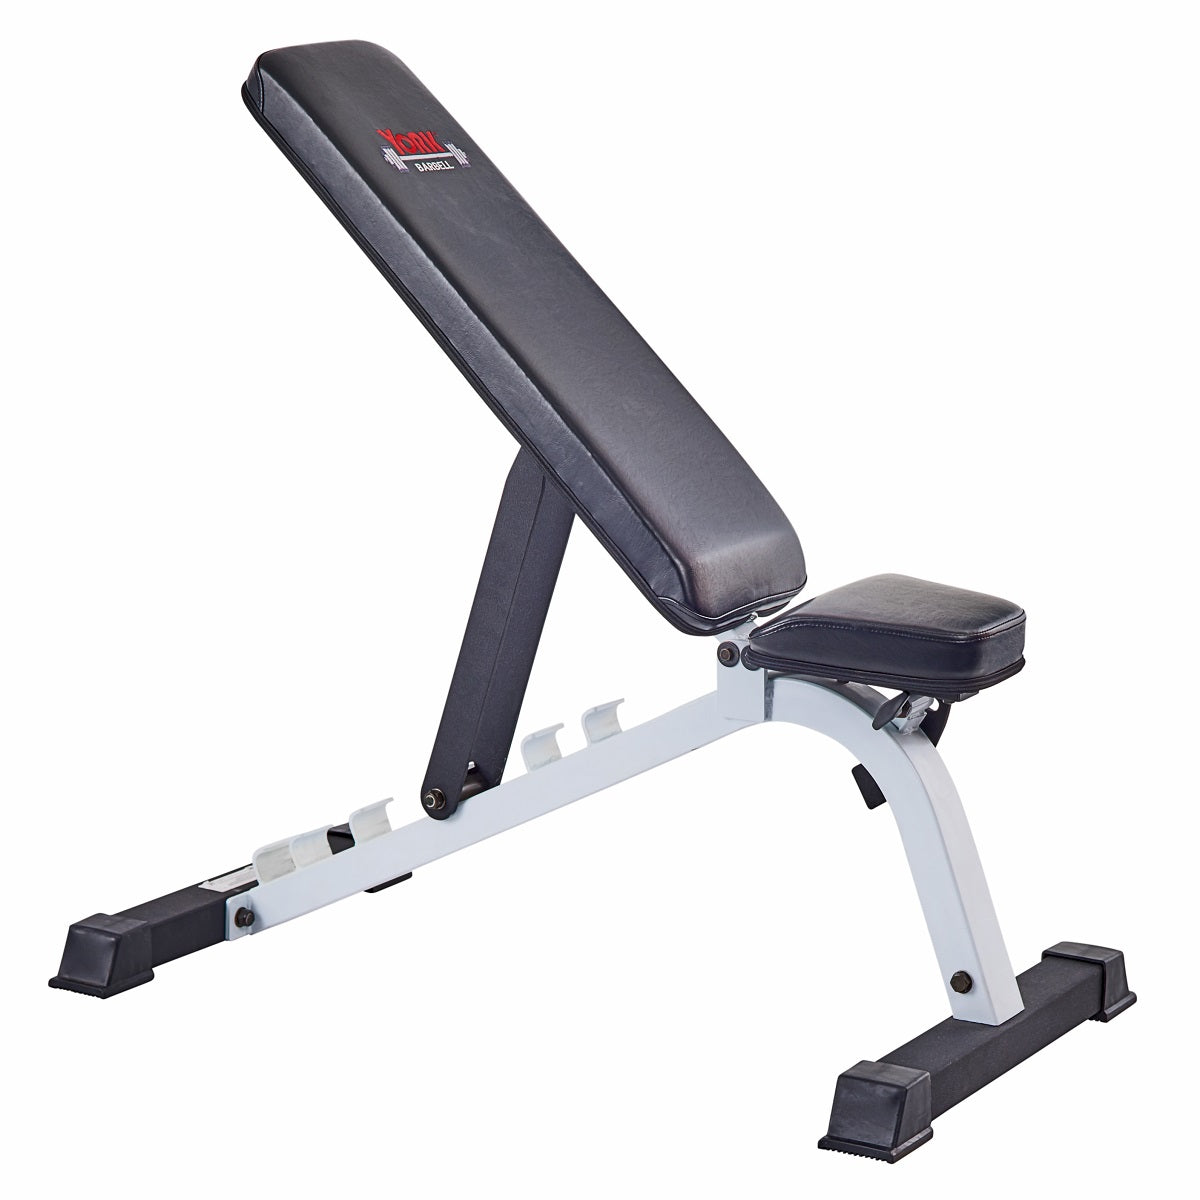 5 Day Adjustable Exercise Bench For Sale for Weight Loss